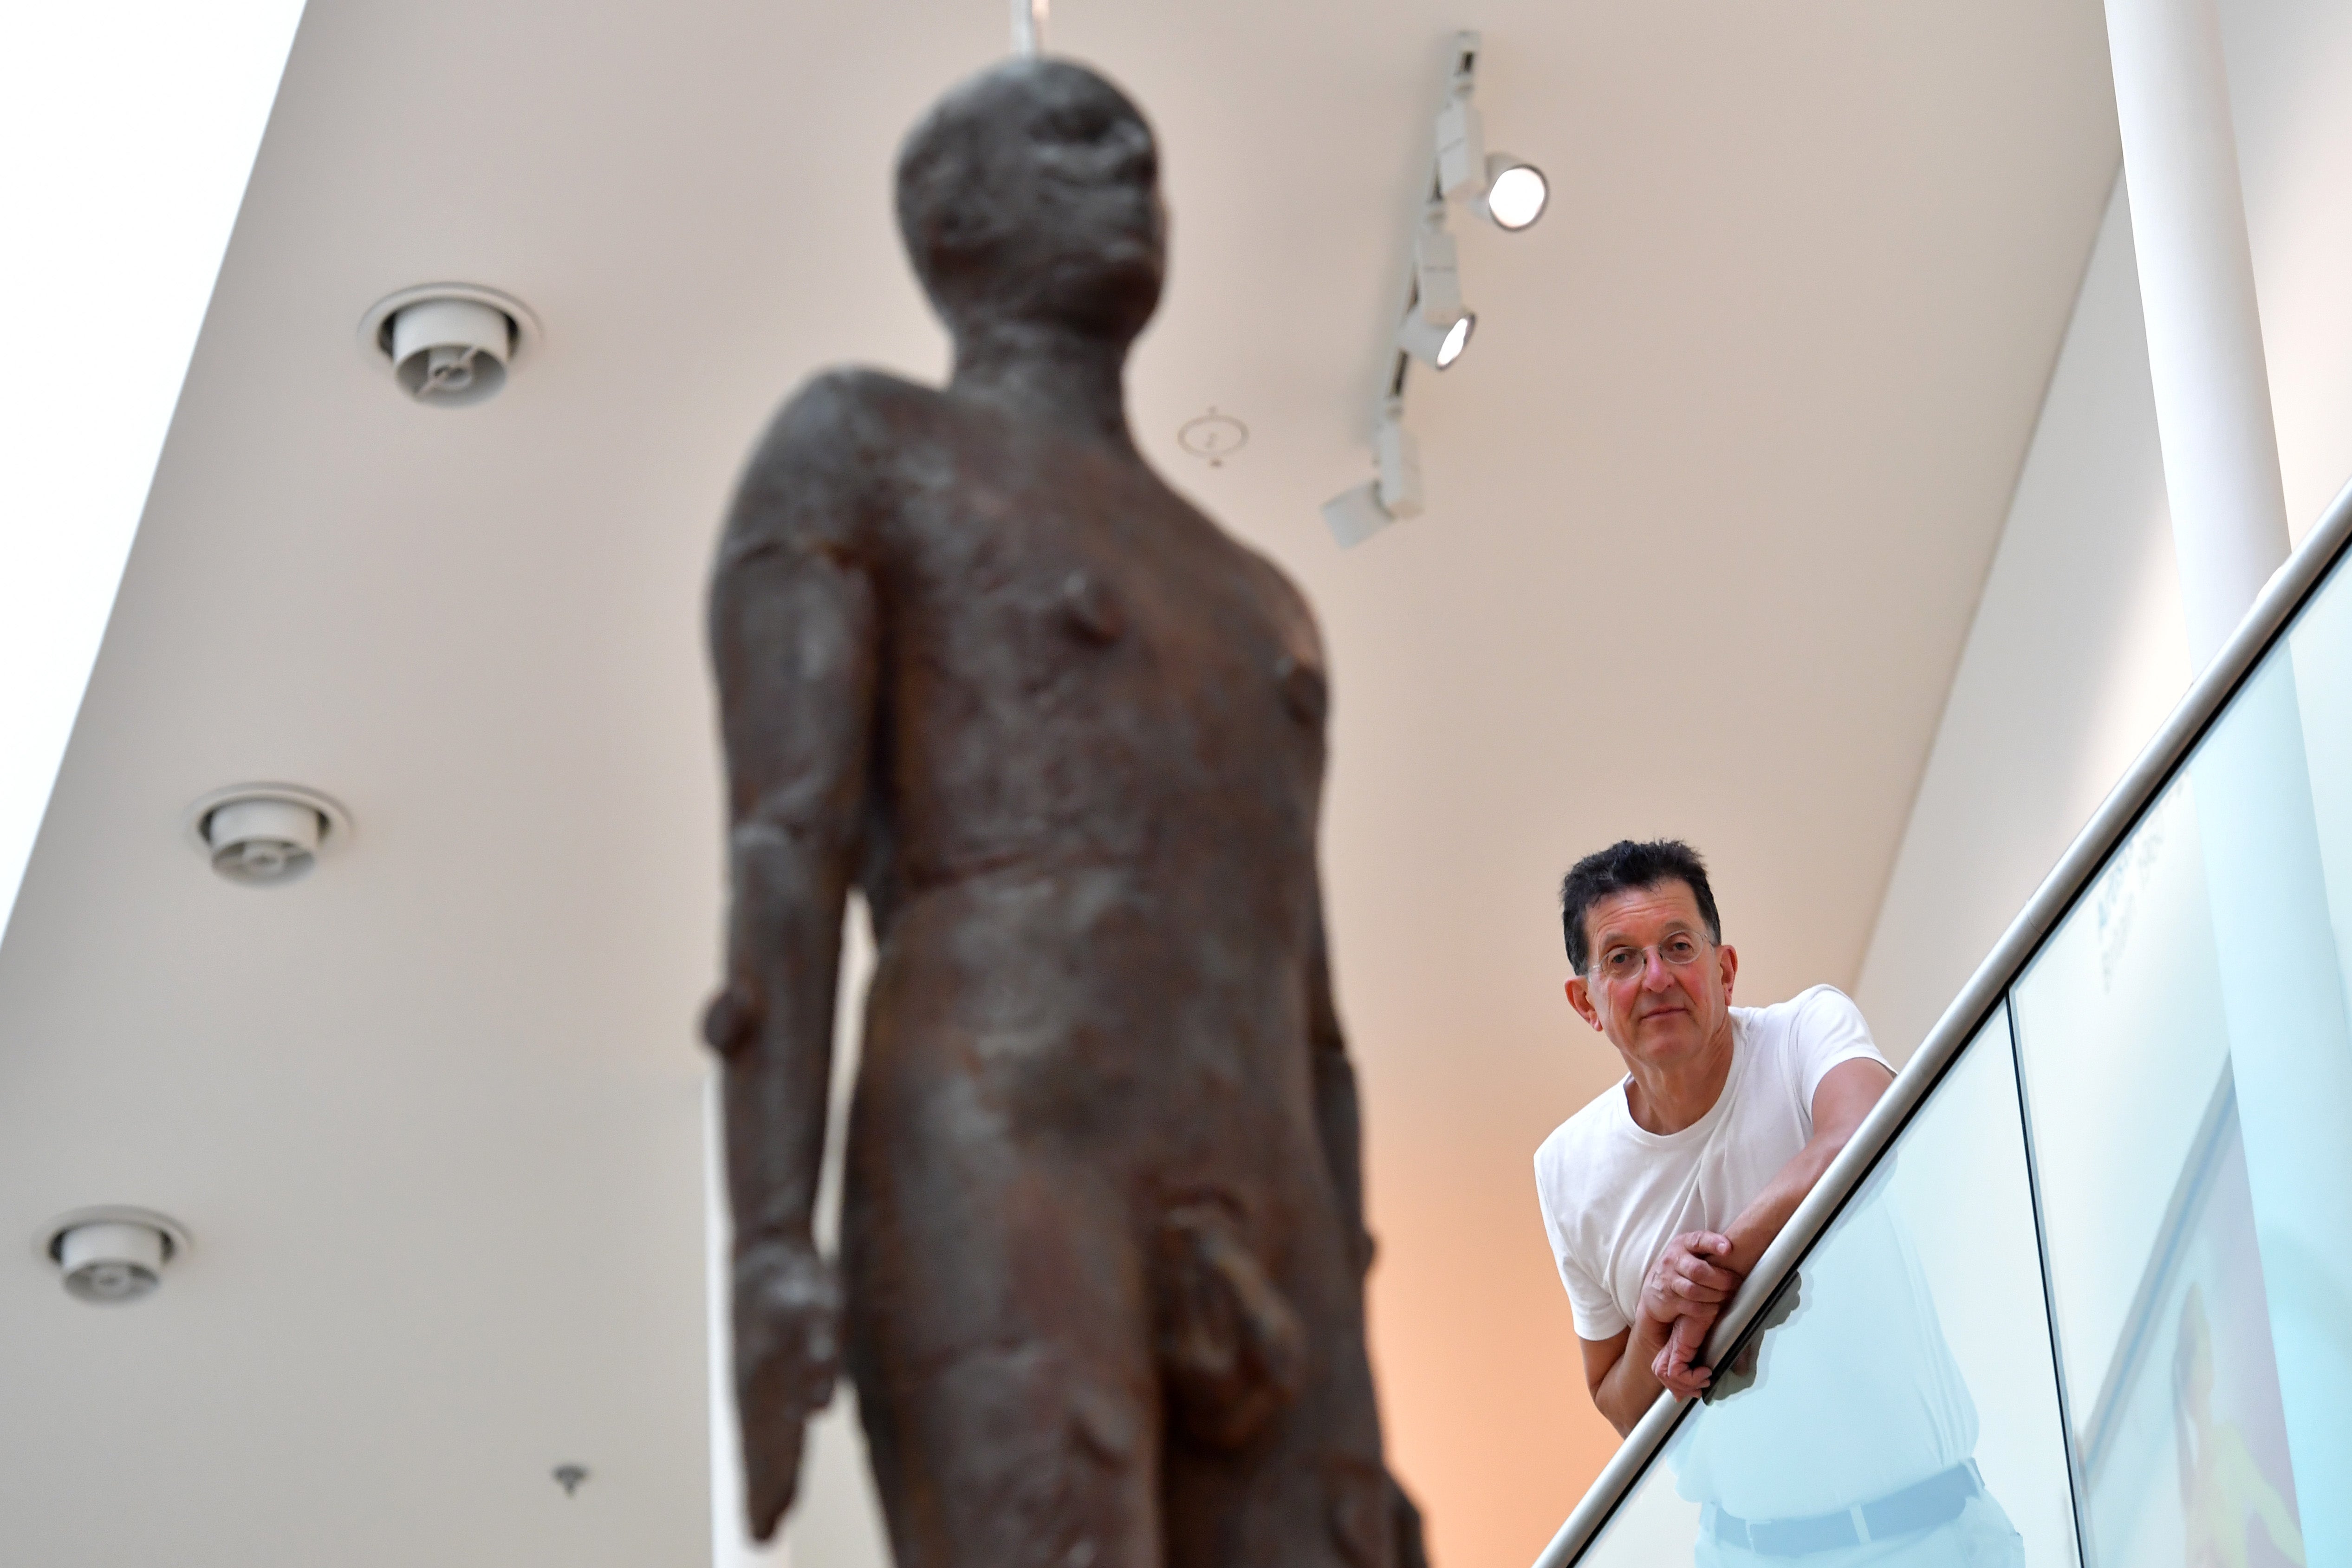 Gormley with his artwork ‘Object, 199’, a life-size iron sculpture cast from the artist’s body and hung from the ceiling of the National Portrait Gallery in 2016